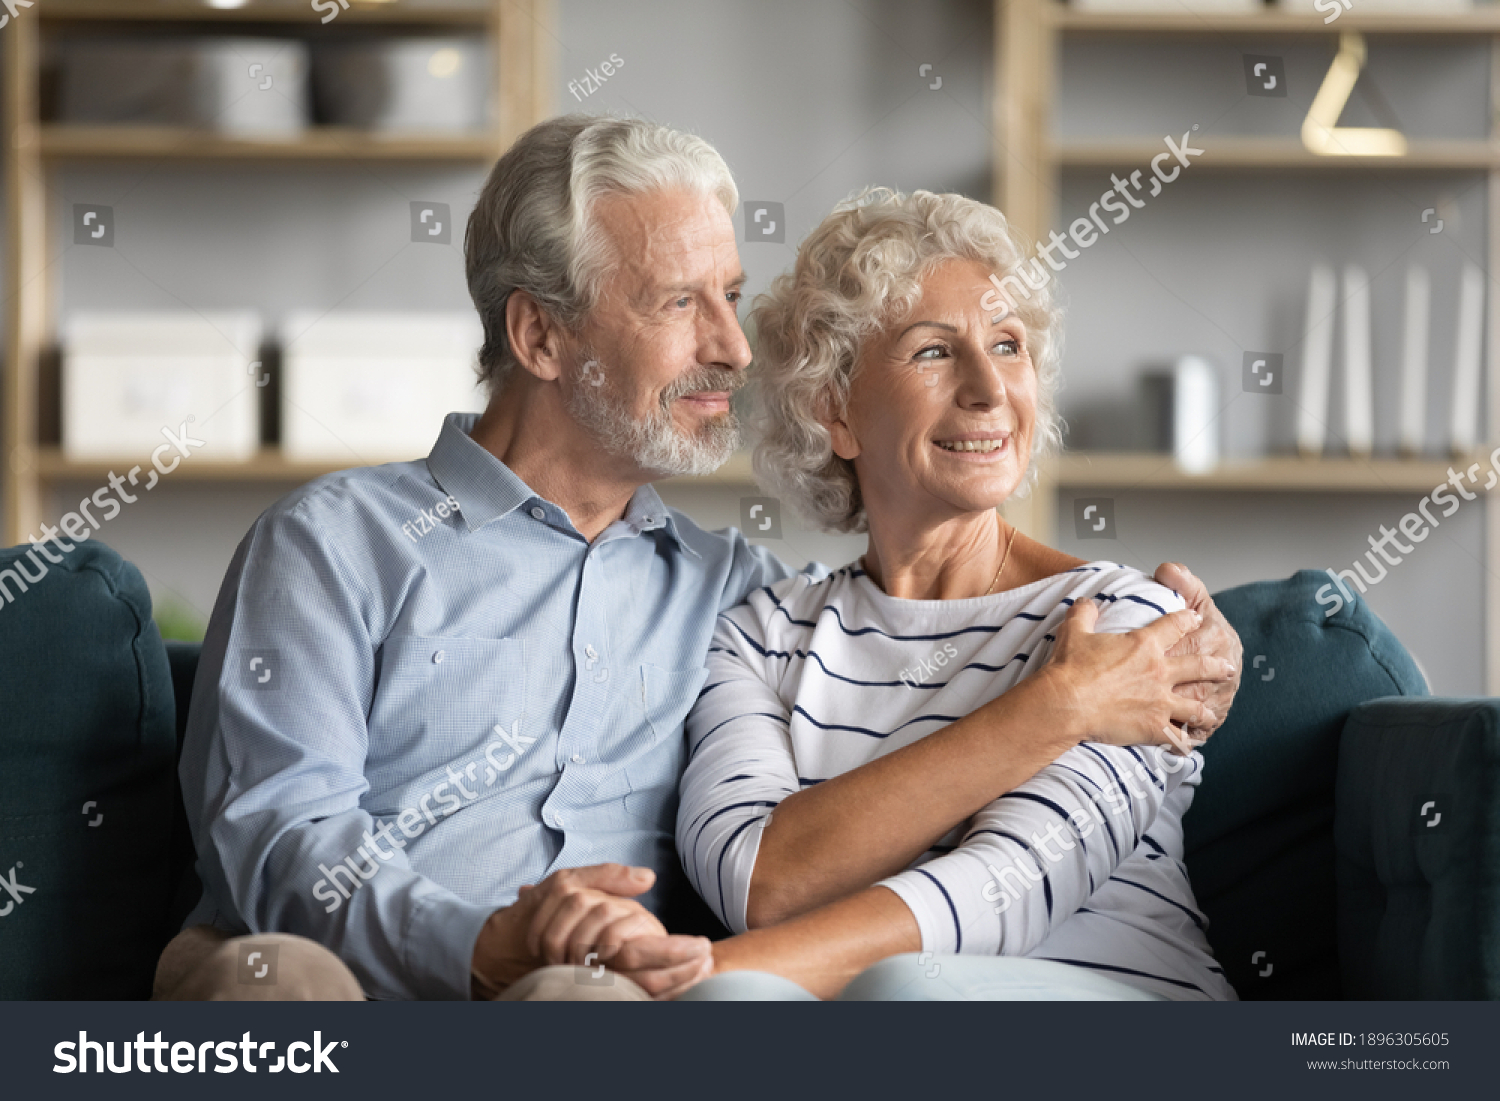 Dreamy middle aged senior loving retired family couple looking in distance, planning common future or recollecting memories, enjoying peaceful moment relaxing together on cozy sofa in living room. #1896305605